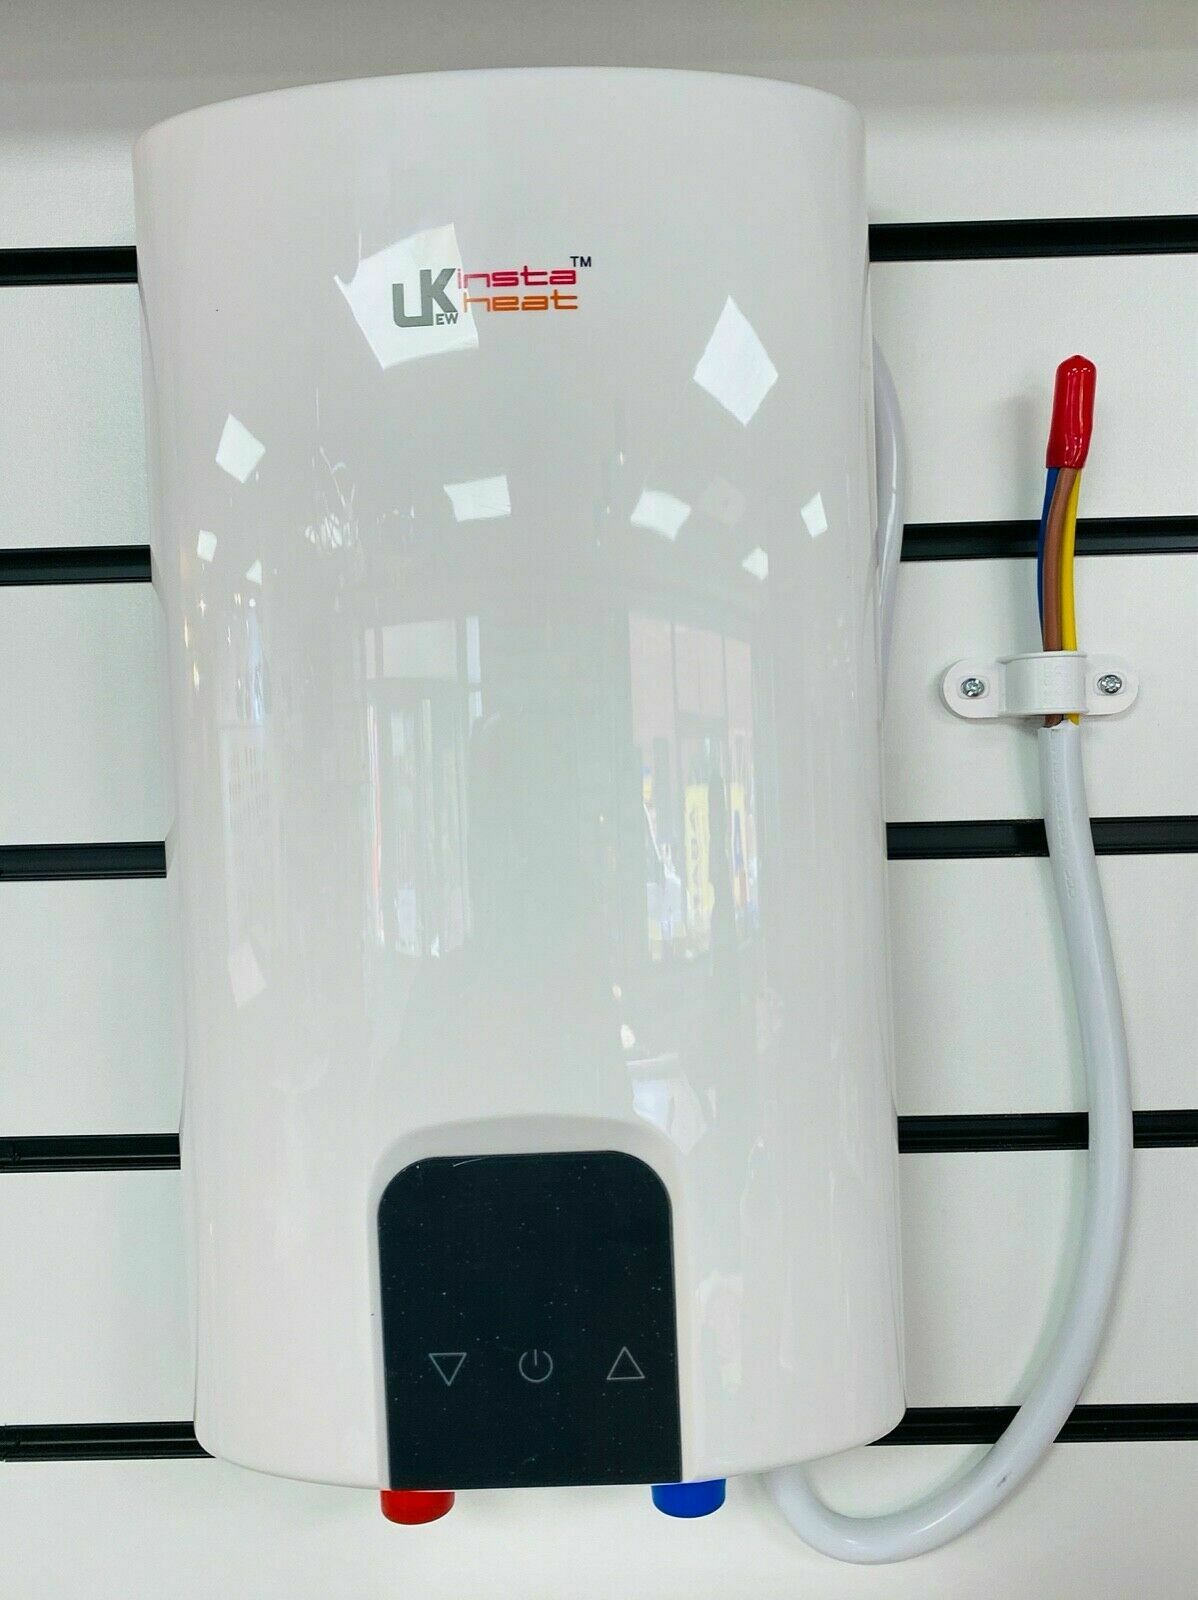 9 KW  Electric Tankless Instant Hot Water Heater Under or Over Sink UKEW Inta Heat